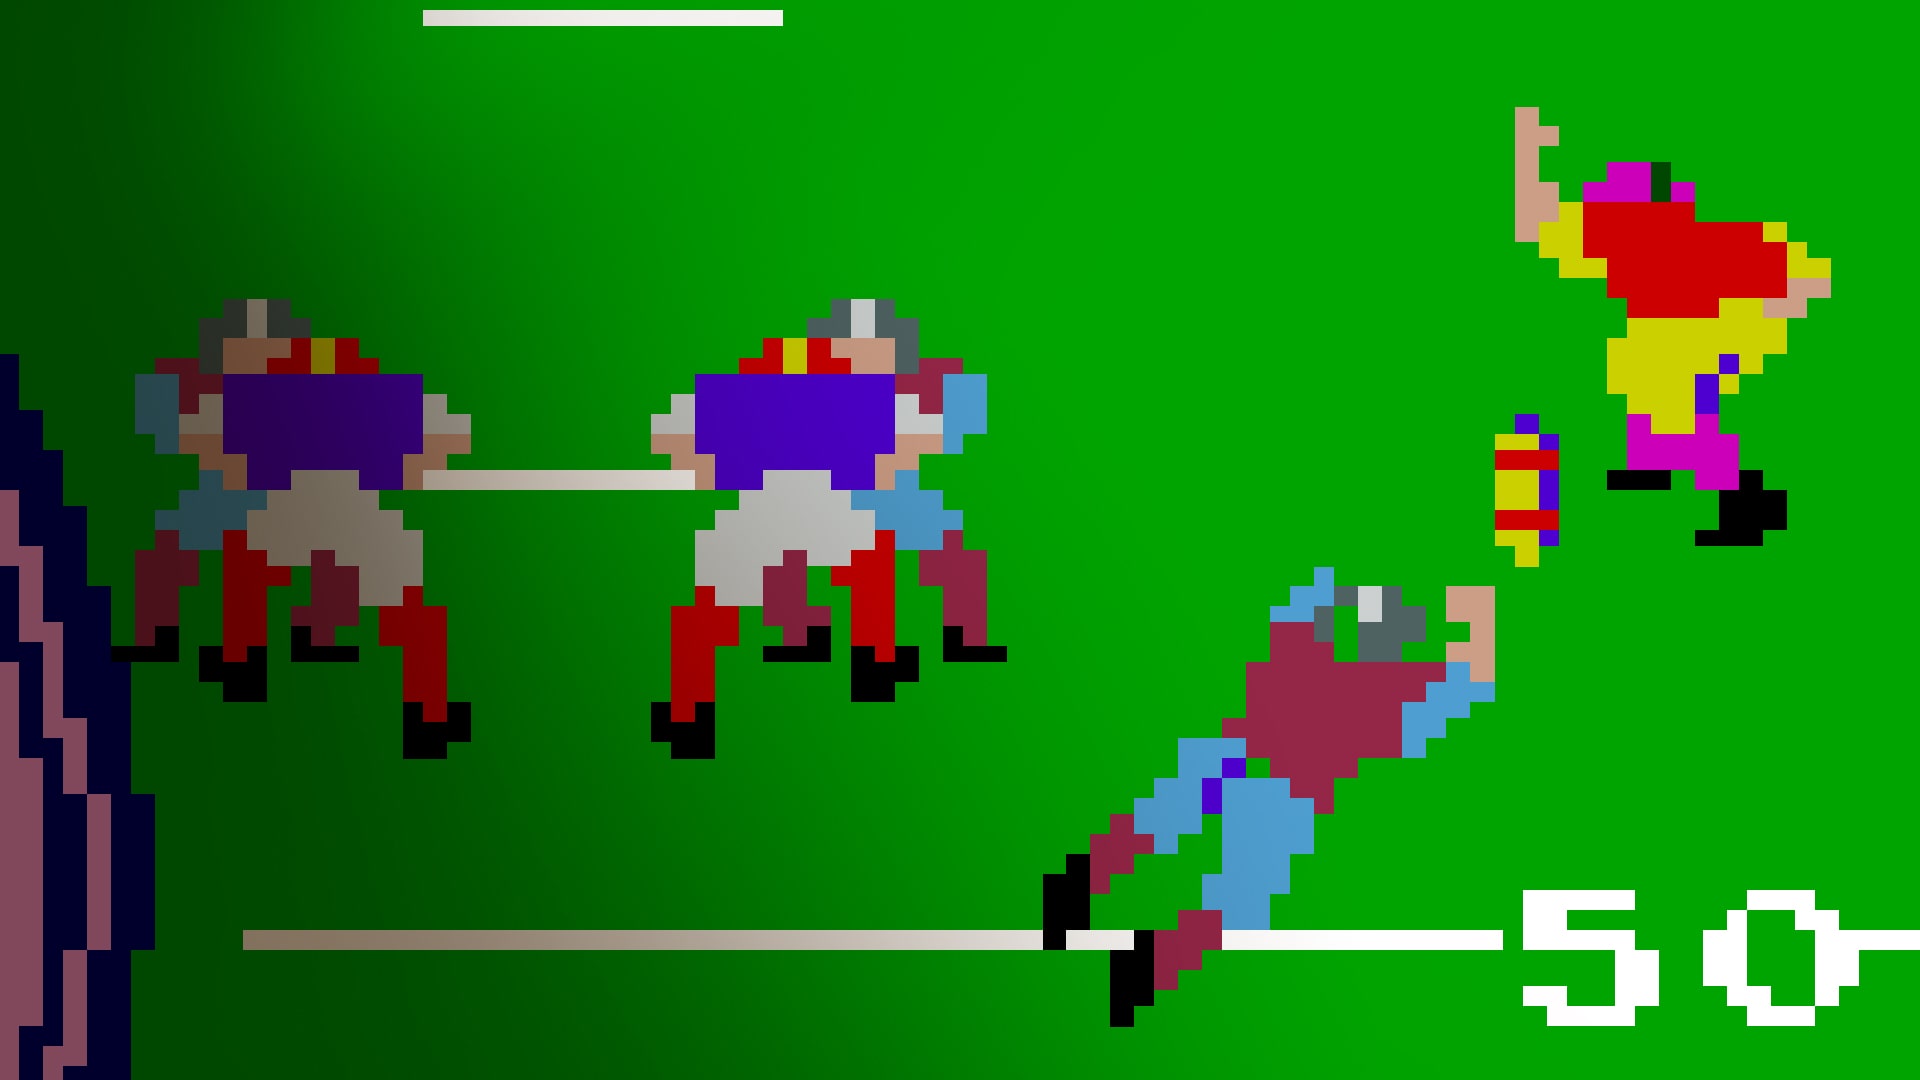 Arcade Archives 10-Yard Fight